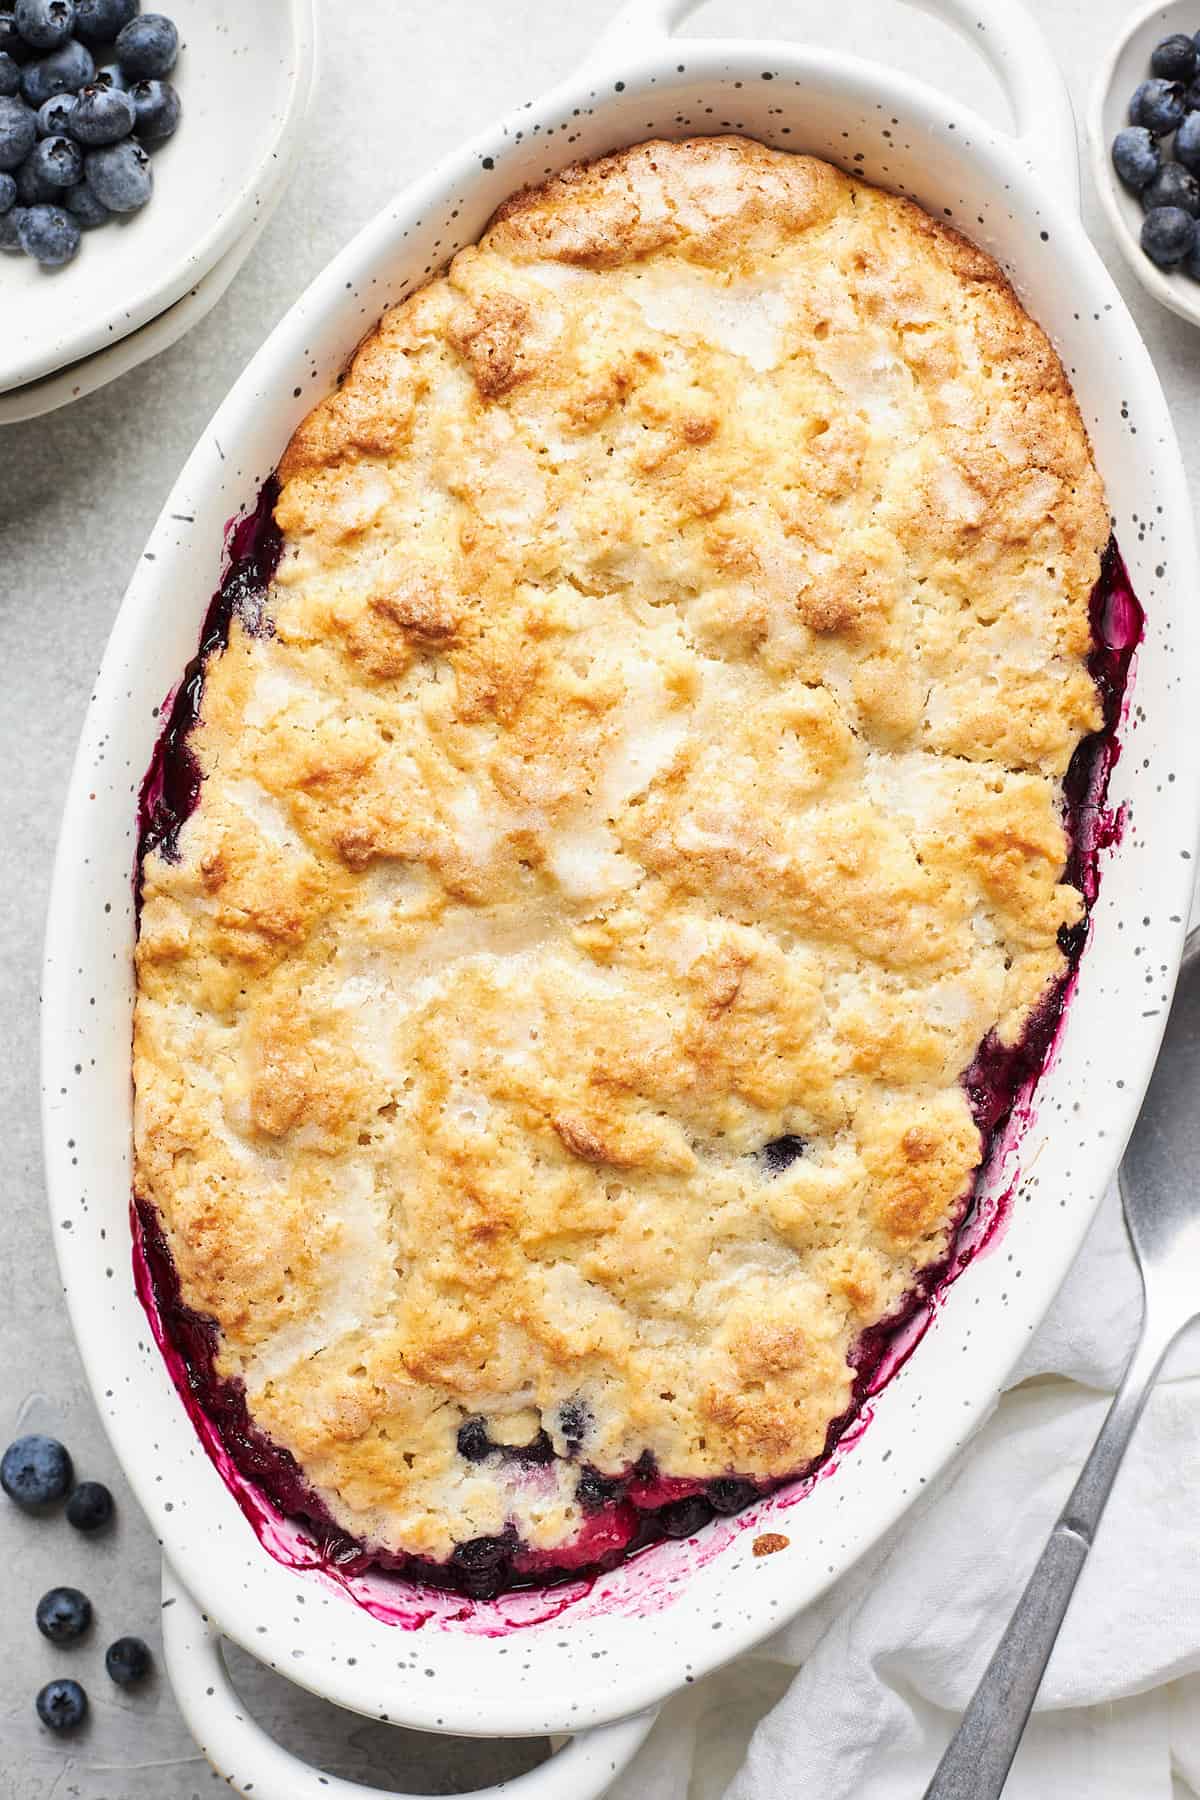 Freshly made blueberry cobbler in an oval baking dish.